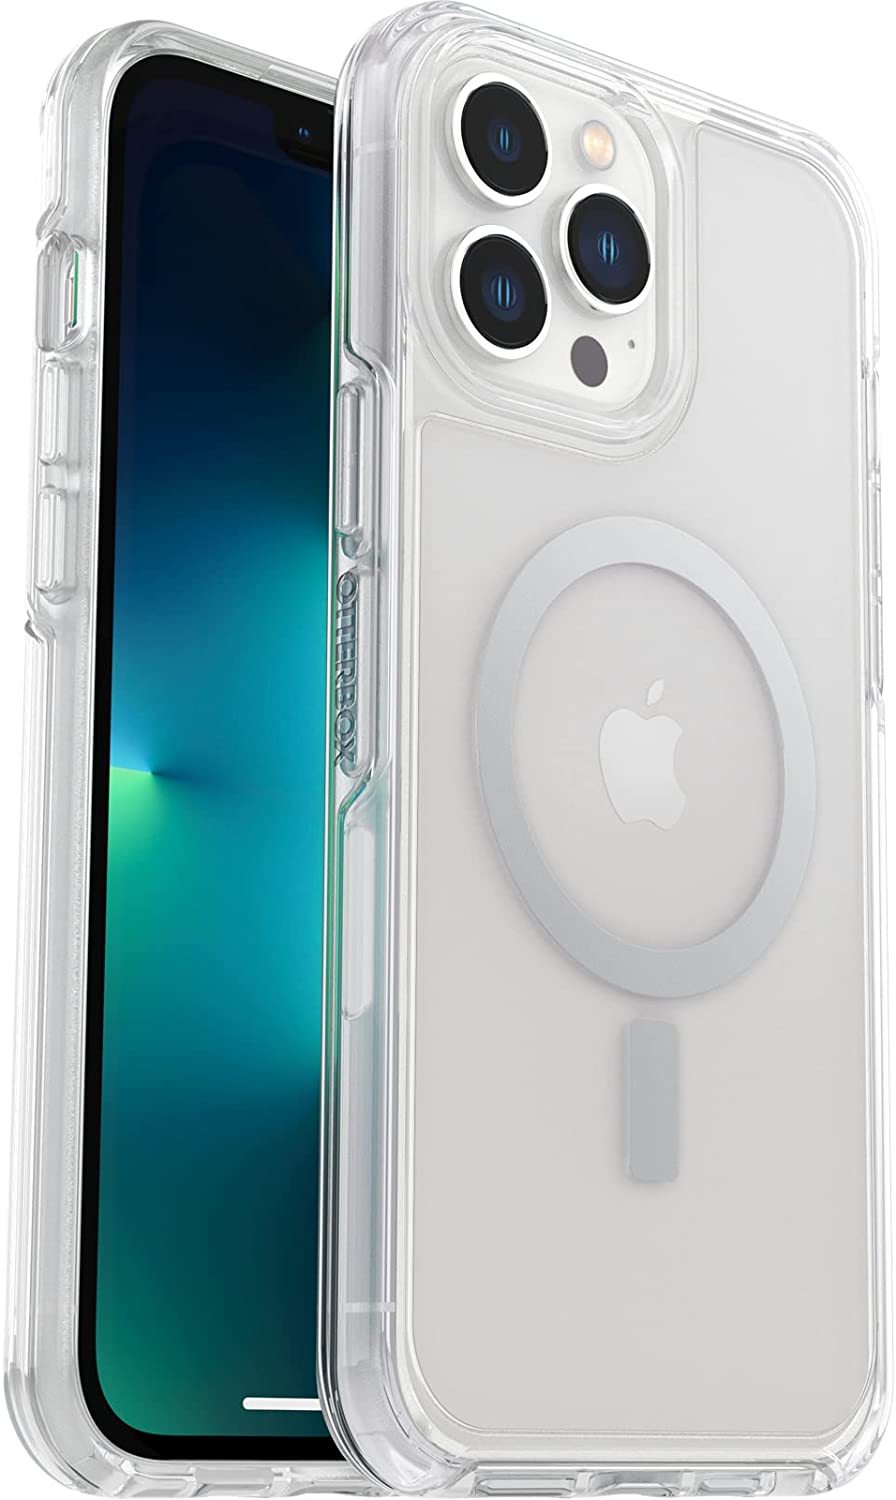 OtterBox SYMMETRY SERIES+ Case for Apple iPhone 12 Pro Max - Clear (Certified Refurbished)